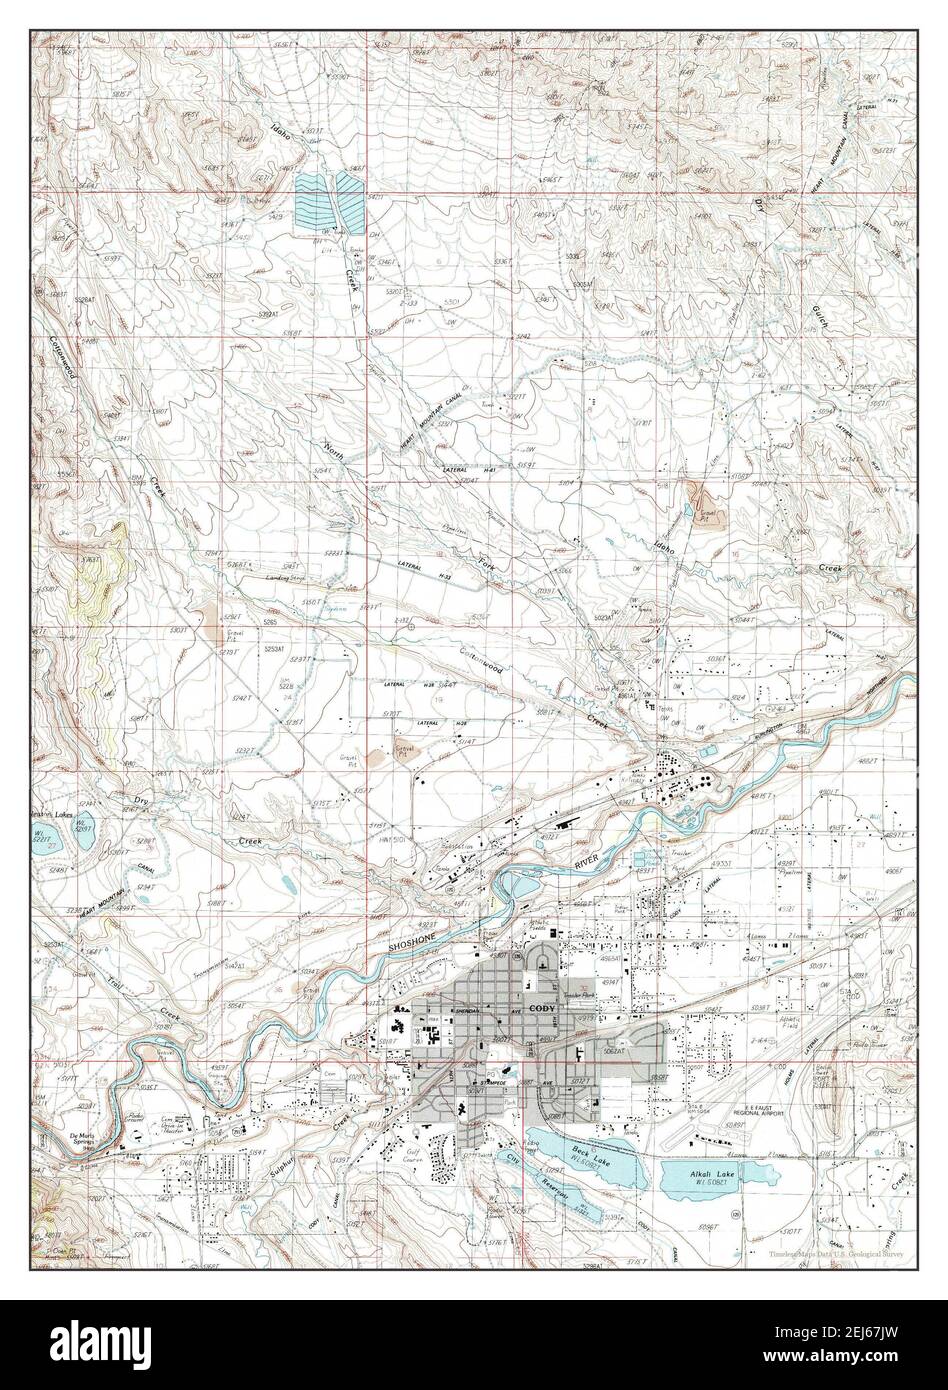 Cody, Wyoming, map 1987, 1:24000, United States of America by Timeless Maps, data U.S. Geological Survey Stock Photo